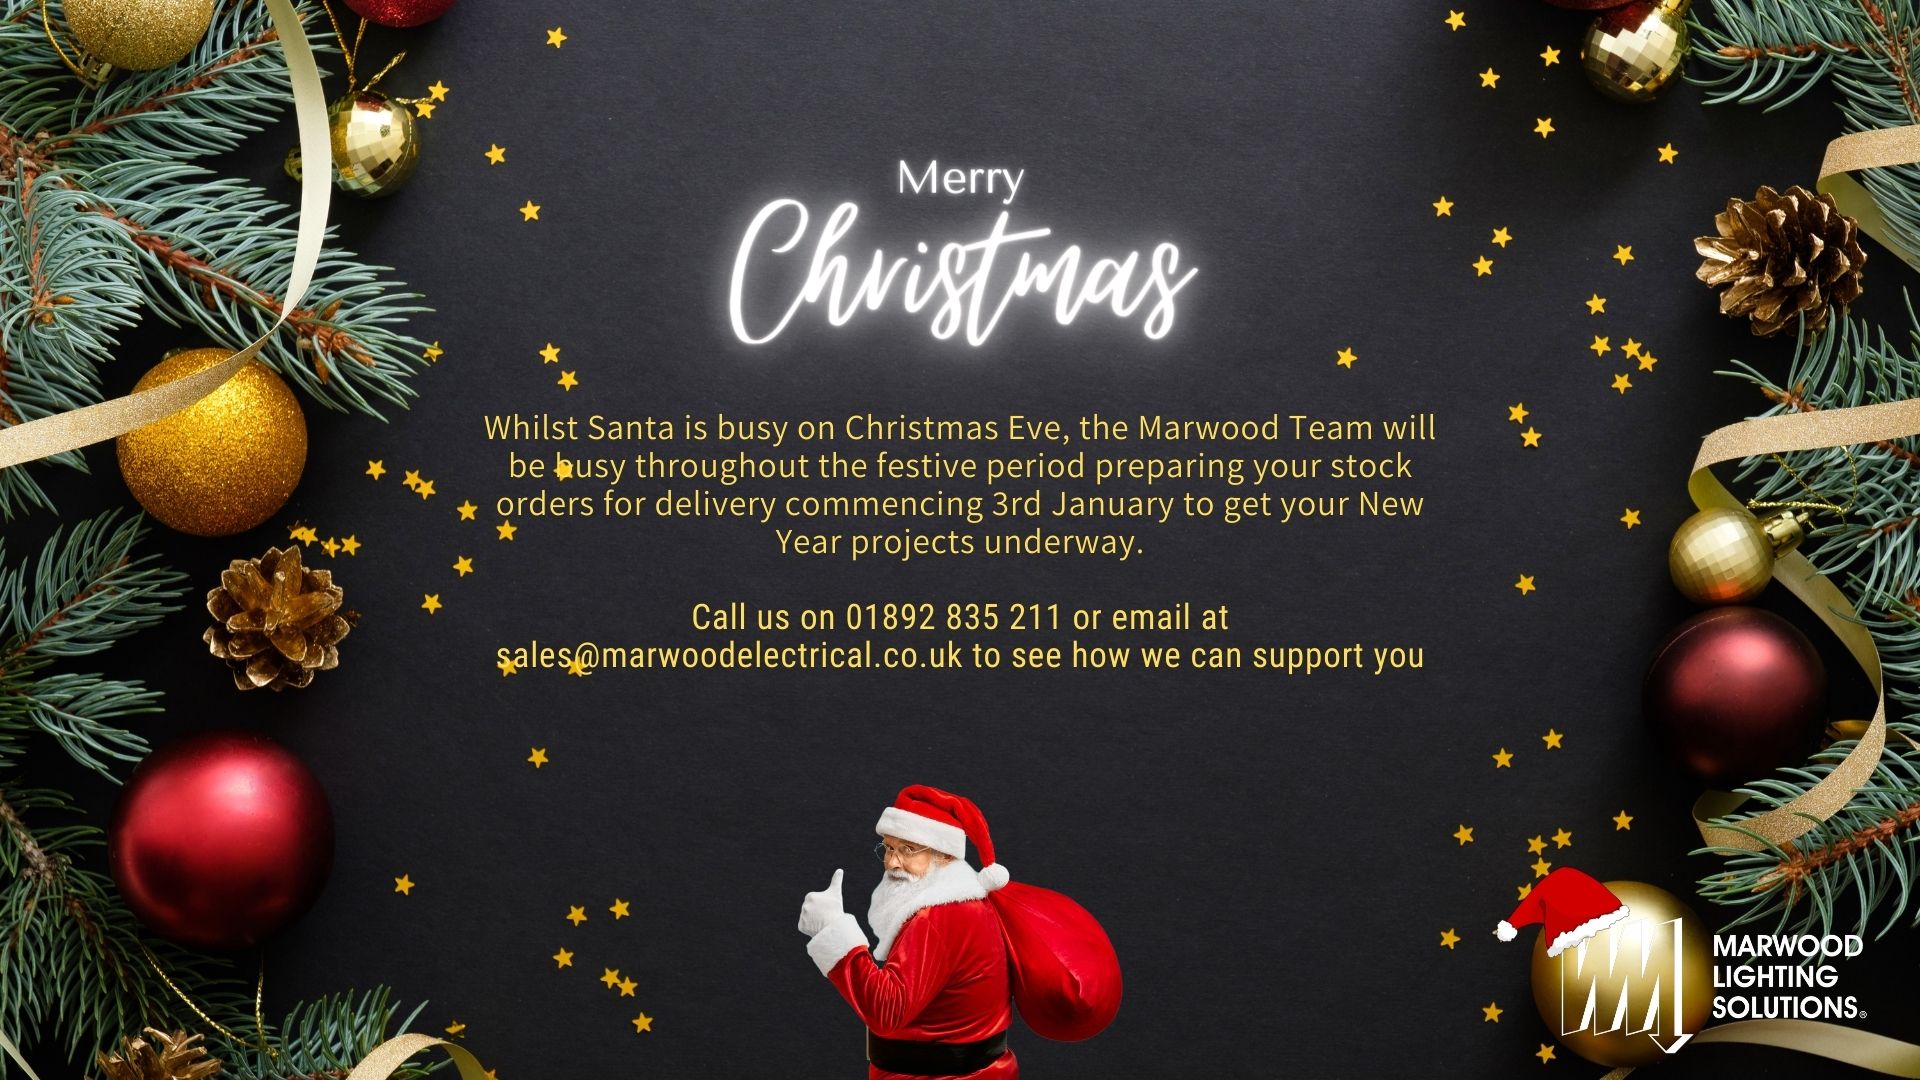 Merry Christmas from Marwood Lighting Solutions